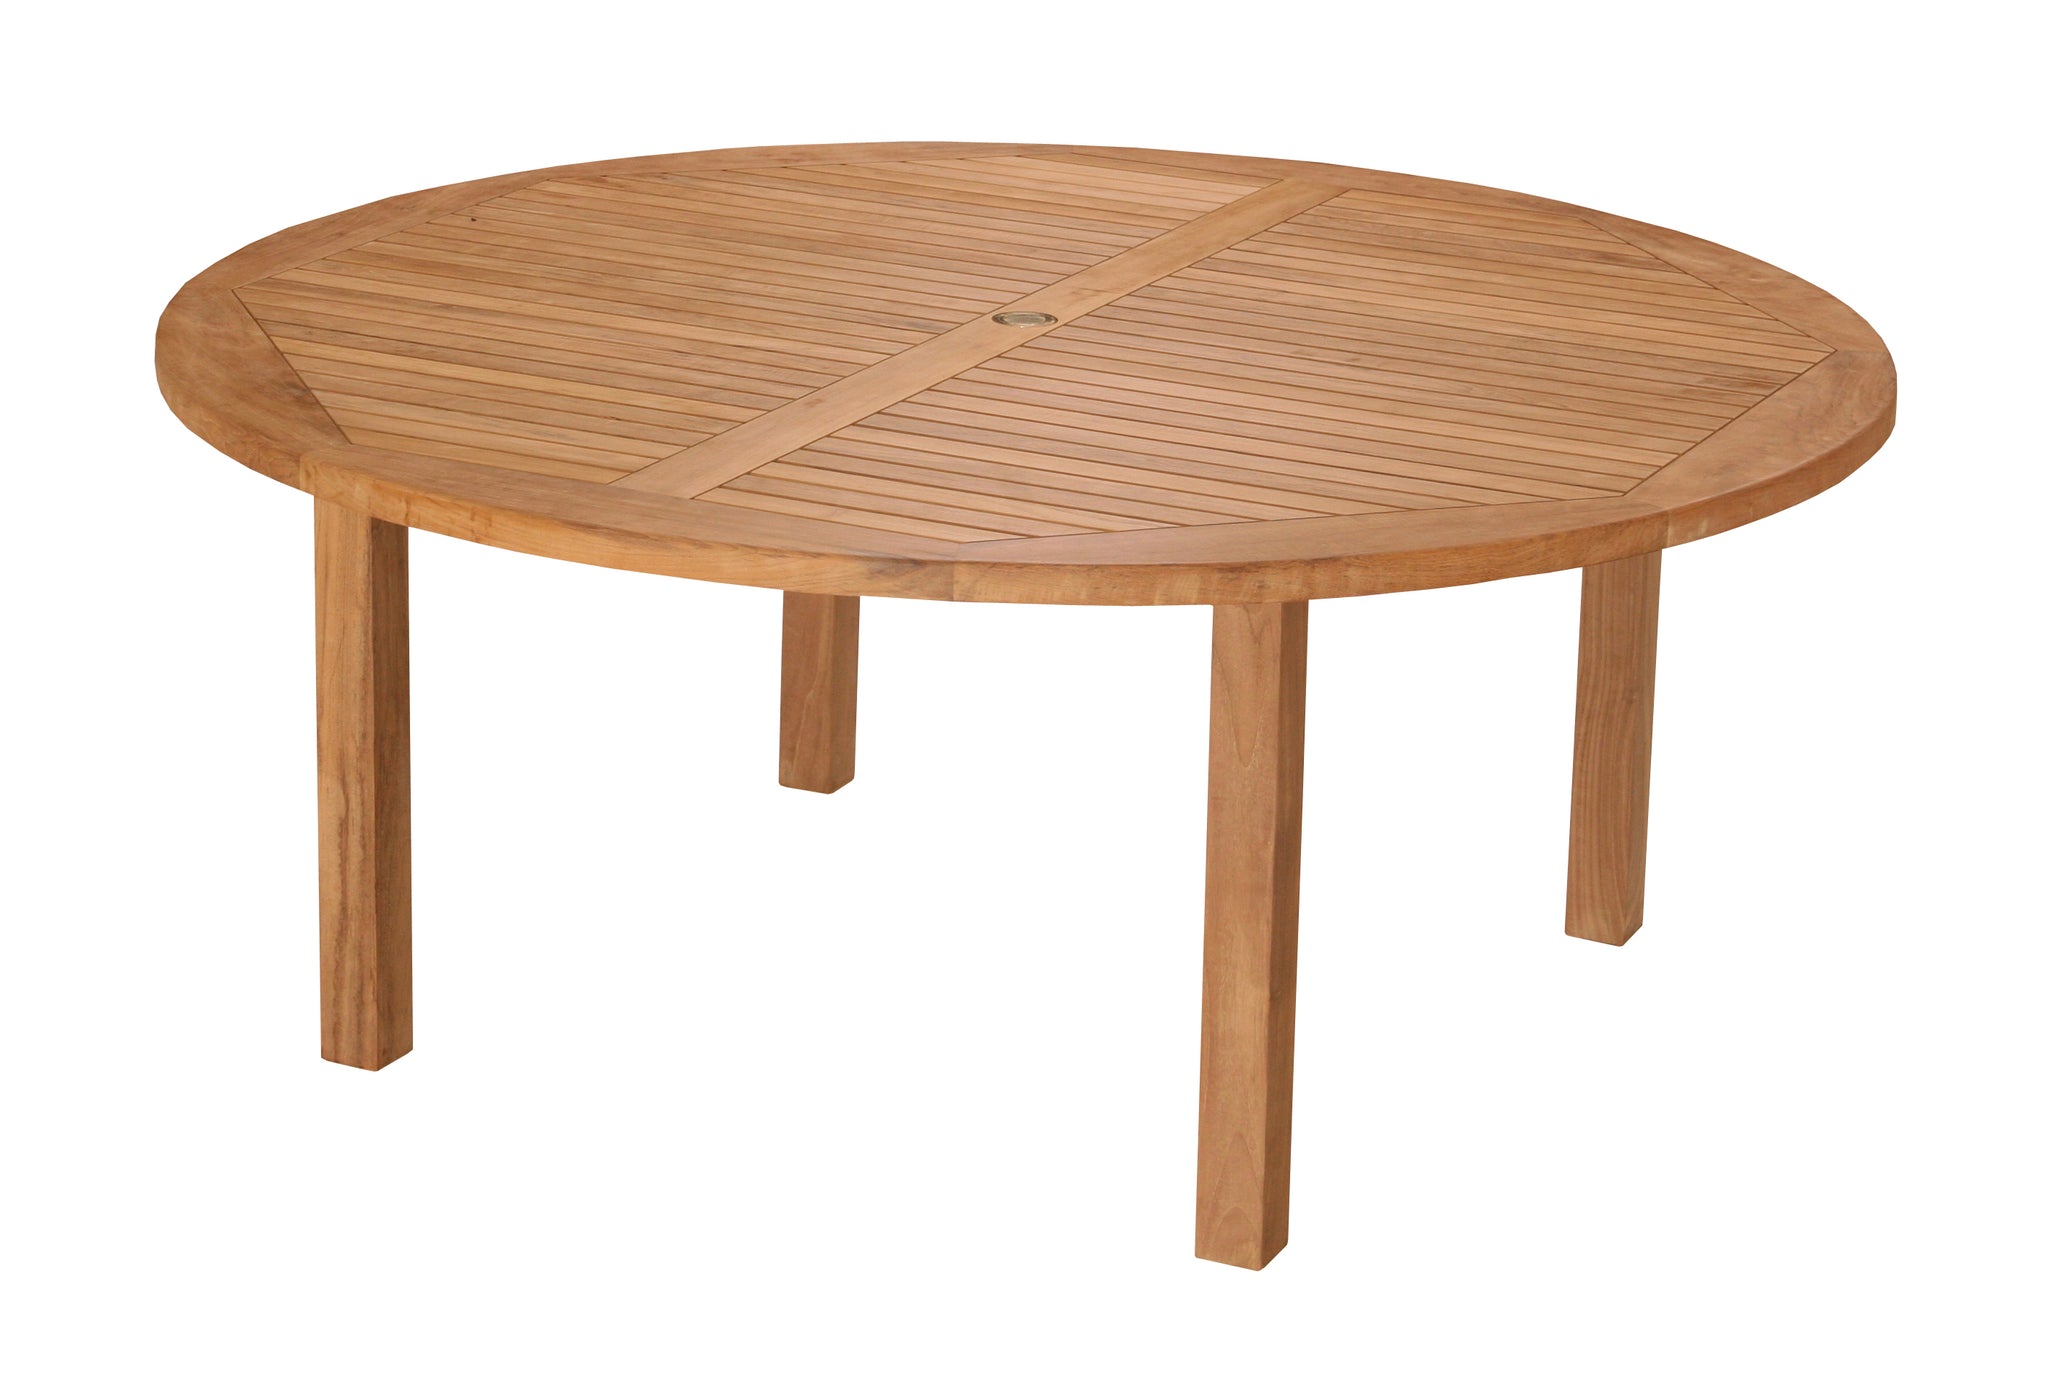 SALE - Garden Teak Round Table 180cm without hole (8-10 Seater)